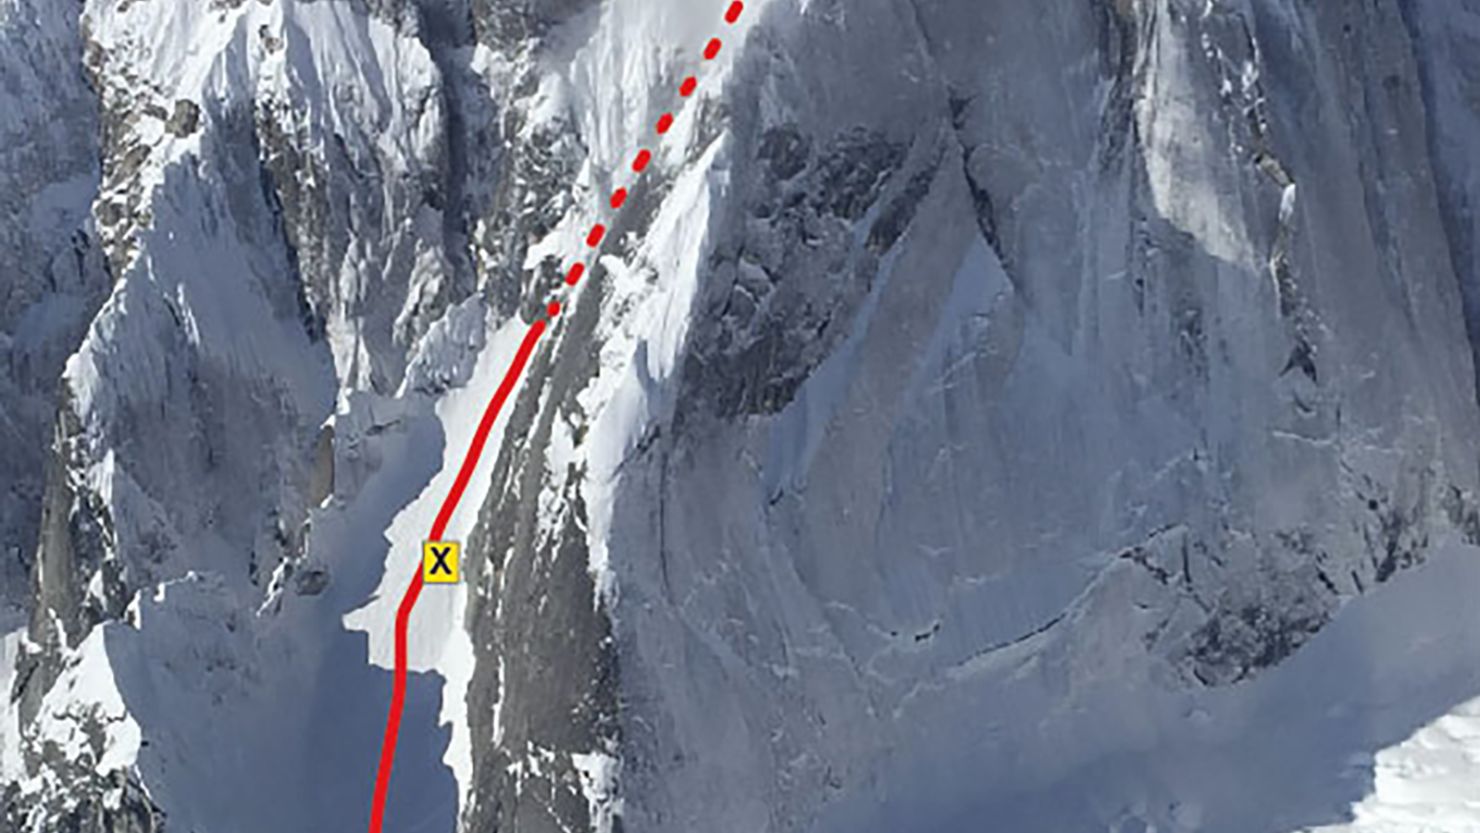 This handout photo shows the "Escalator" route on Mt. Johnson, Denali National Park and Preserve. The X indicates the approximate location of the rescue of the surviving climbing.